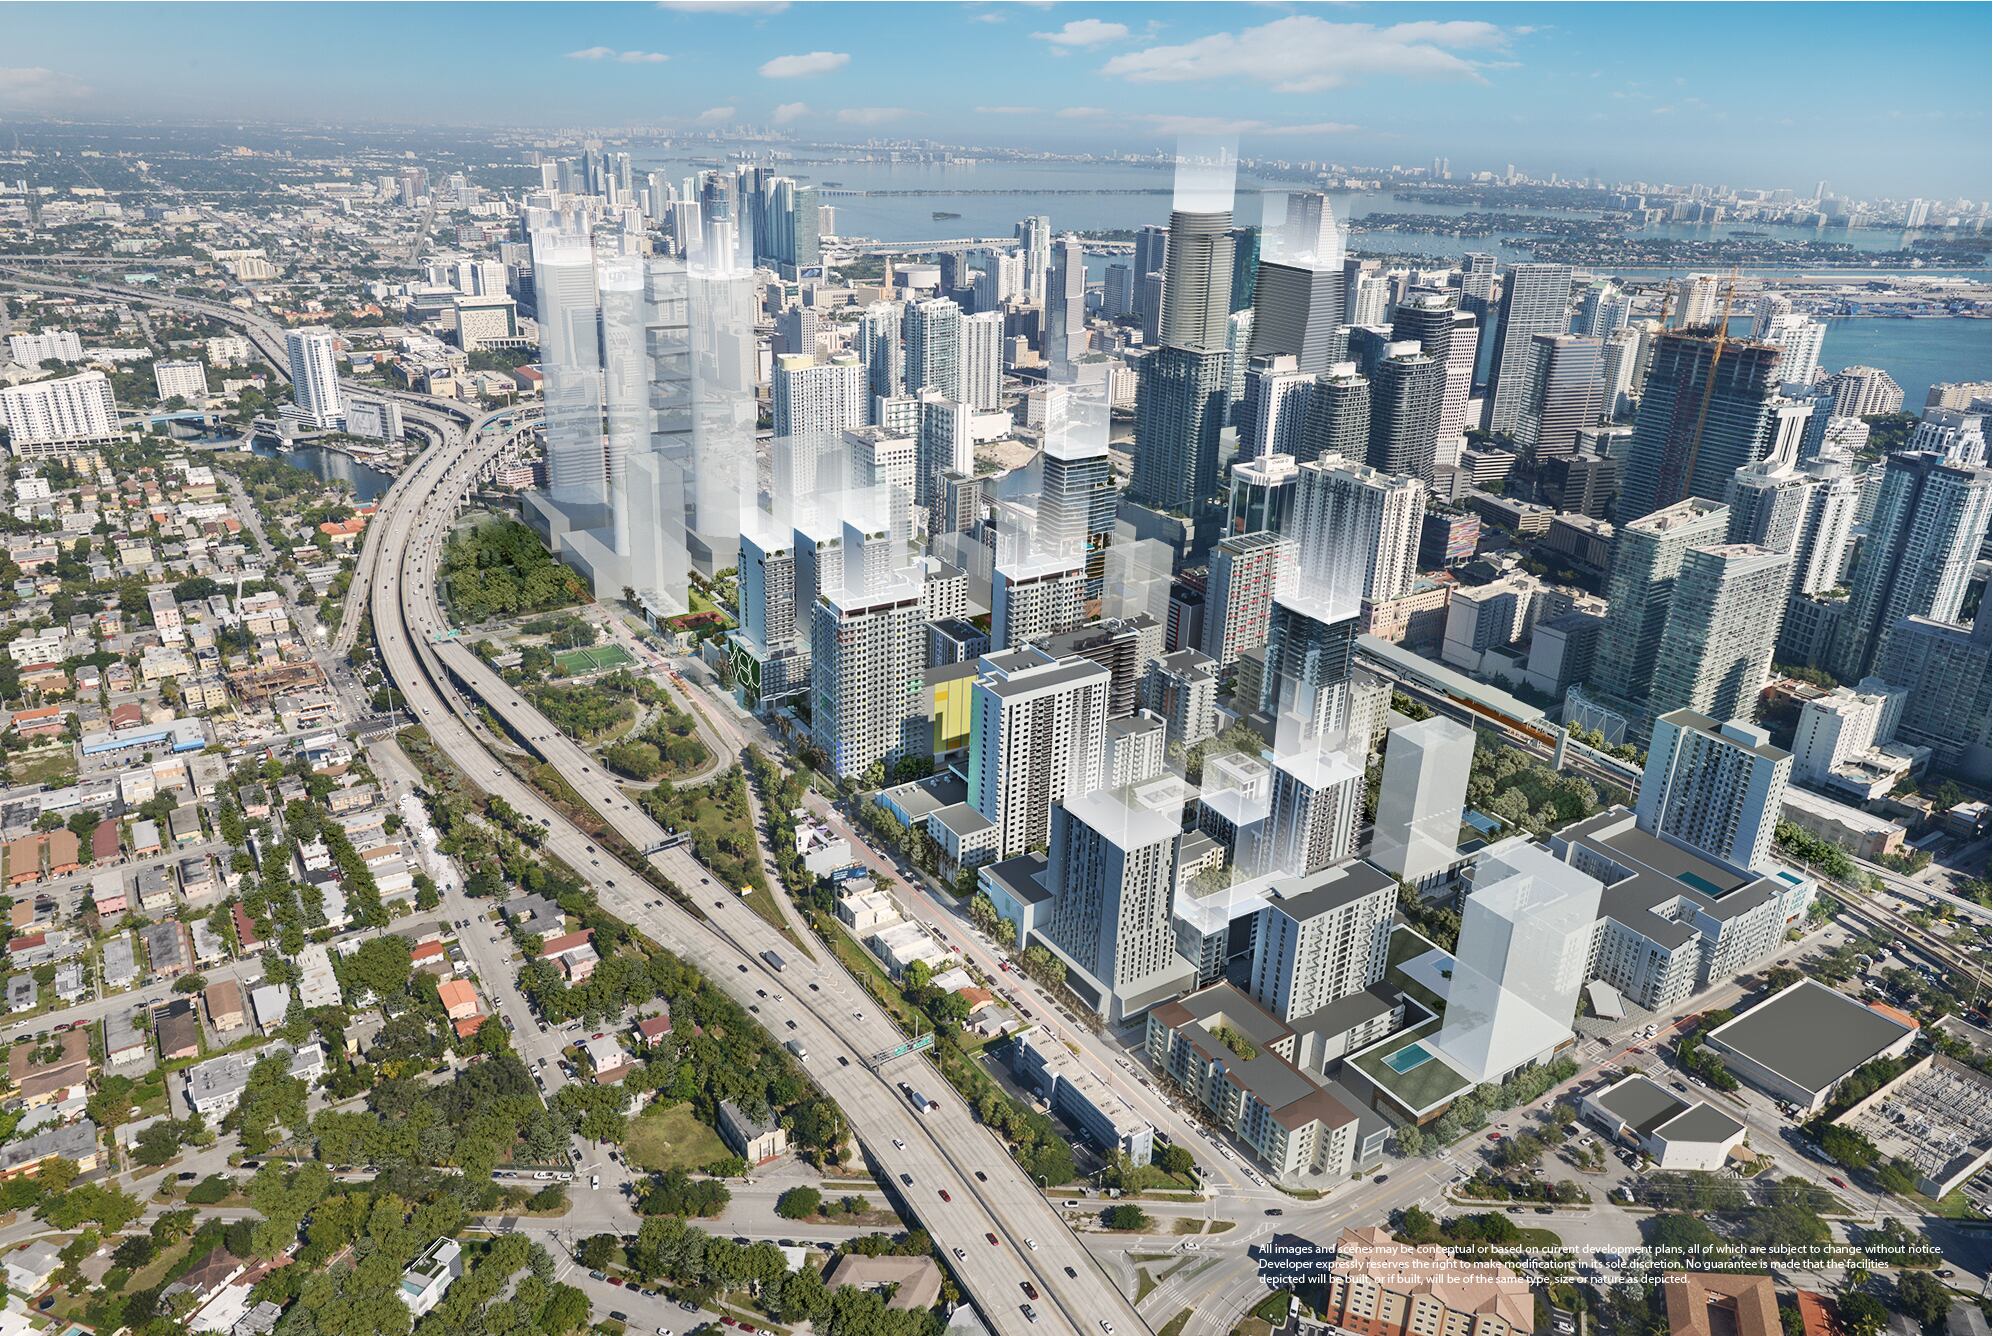 RENDERINGS SHOW WEST BRICKELL’S FUTURE, INCLUDING THOUSANDS OF NEW RESIDENTIAL UNITS